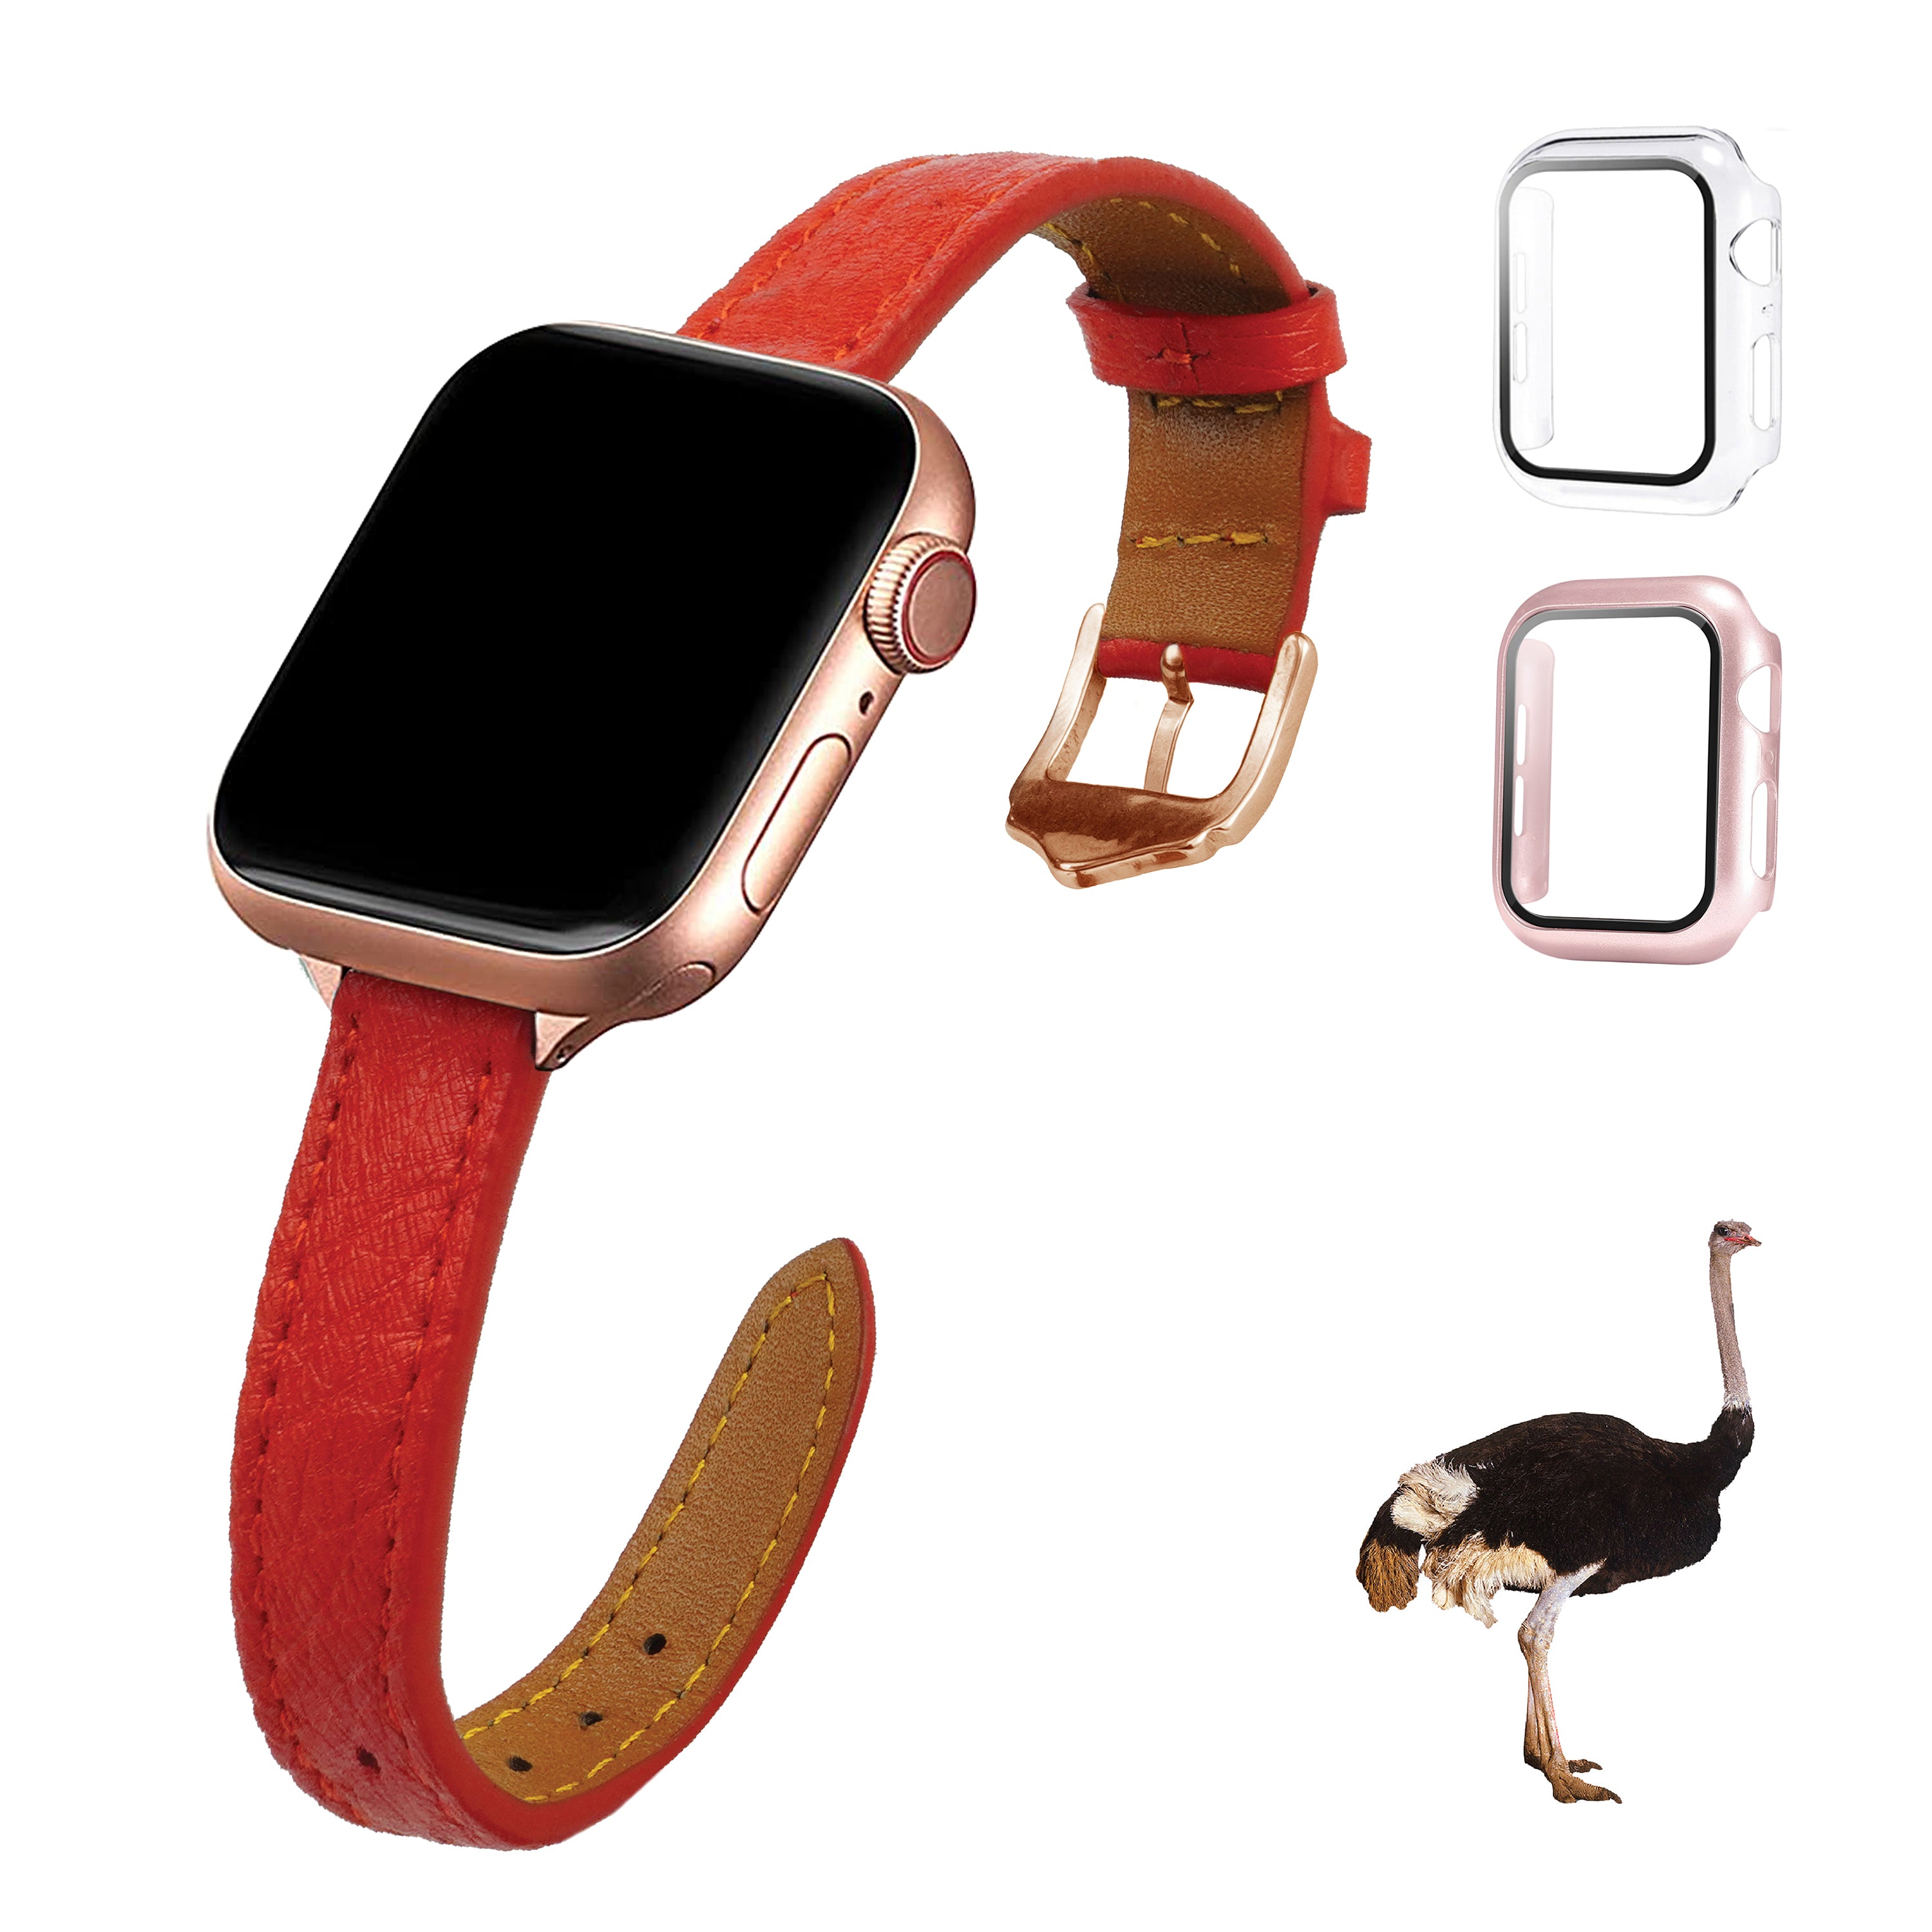 Red Flat Ostrich Leather Band Compatible Apple Watch Iwatch 40mm Screen Protector Case Gold Adapter Replacement Strap For Smartwatch Series 4 5 6 SE Leather Handmade AW-190G-W-40MM